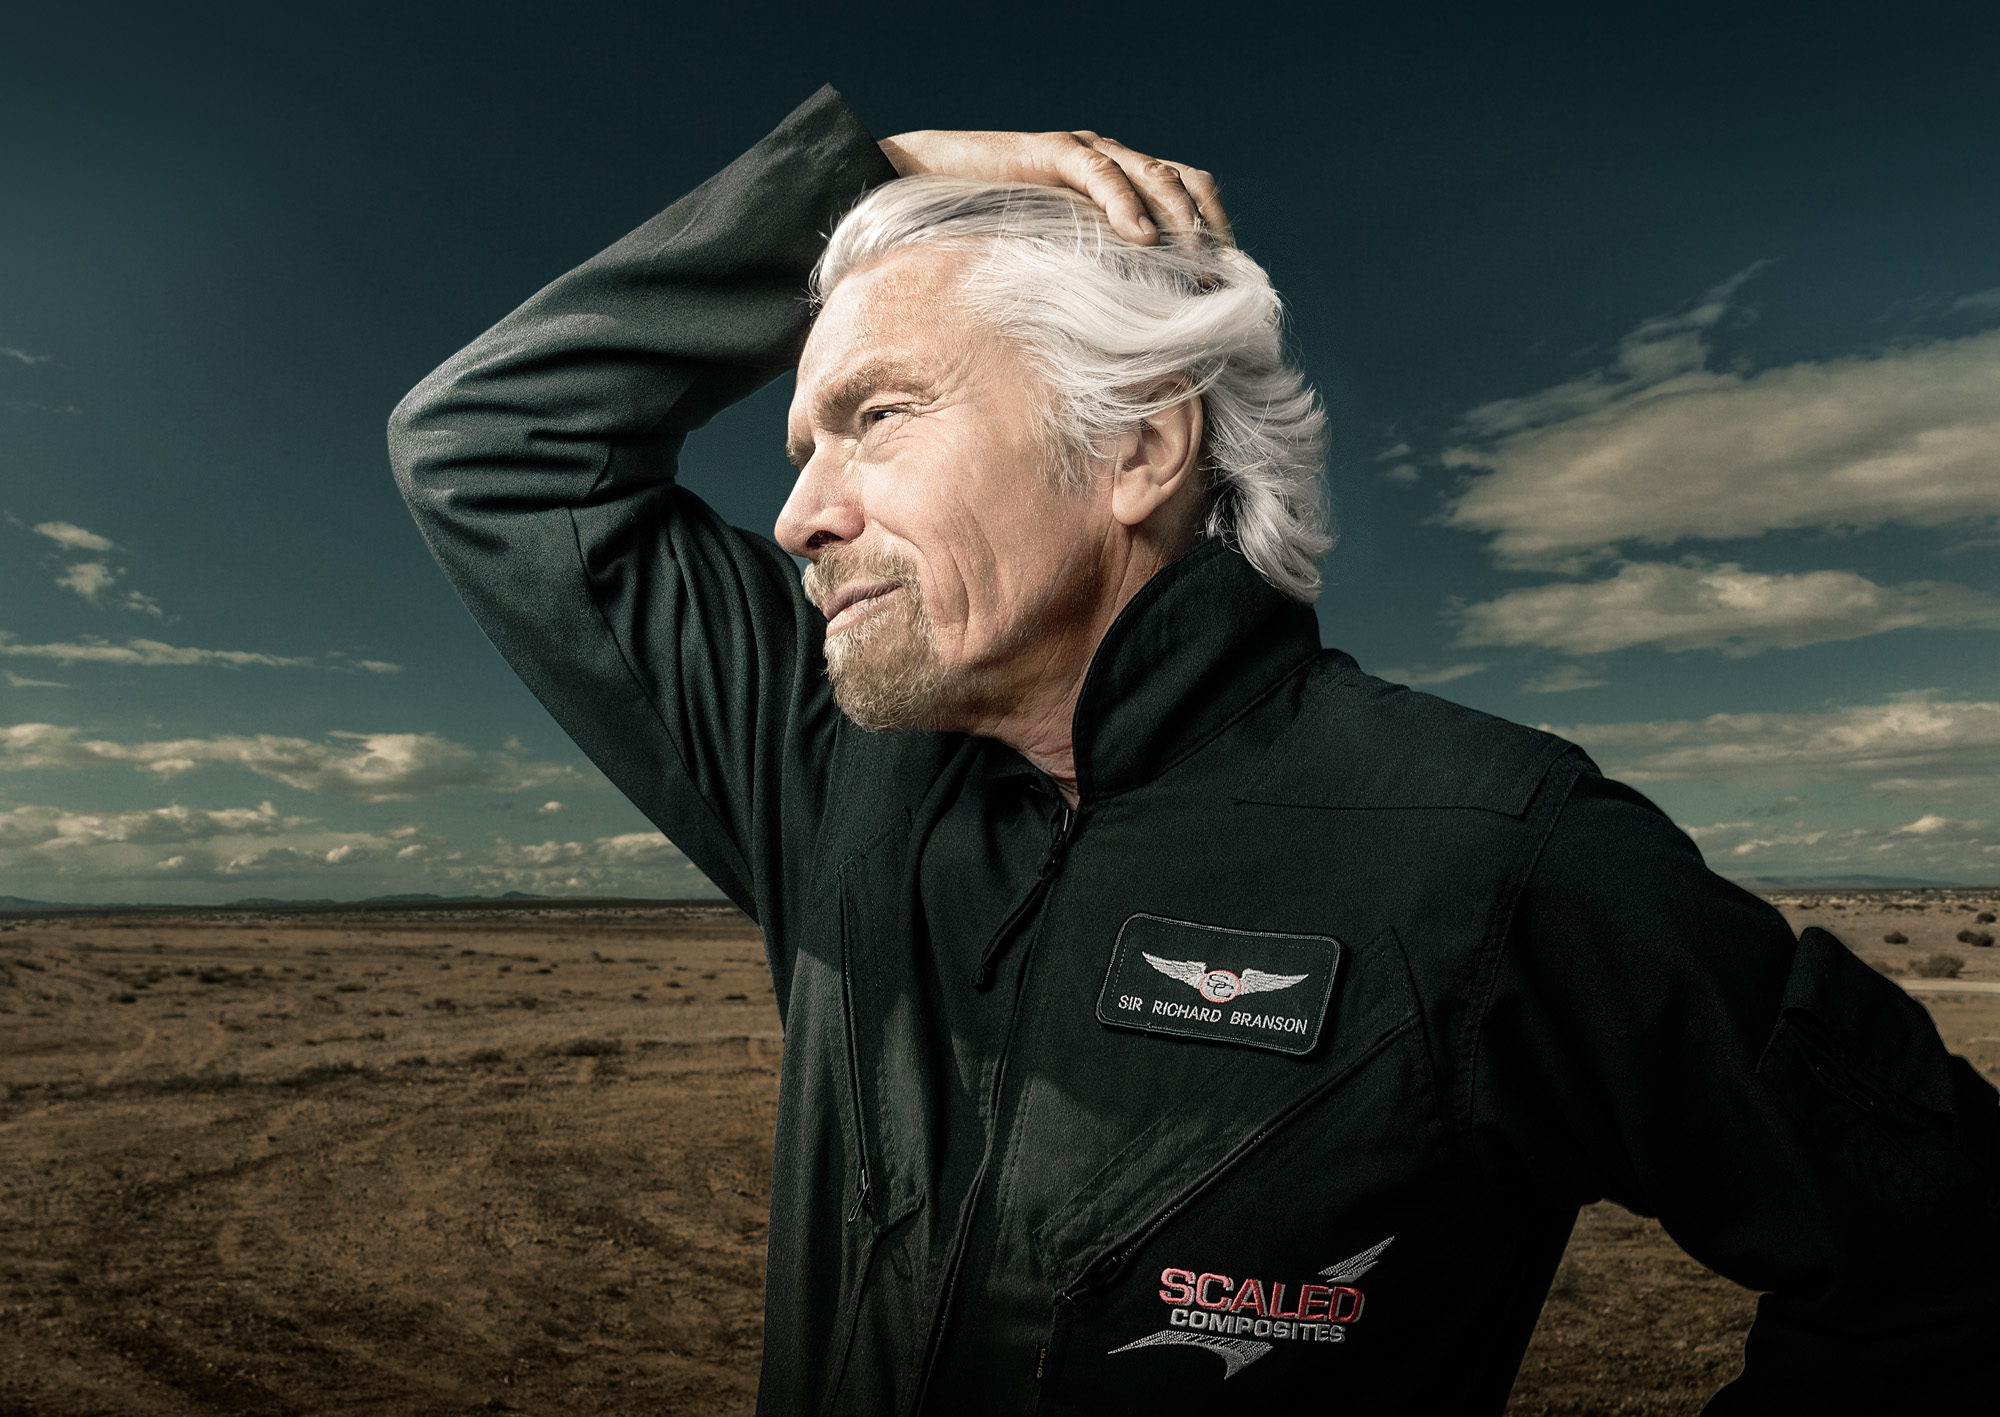 cc2012082 - Richard Branson and Virgin Galactic photographed for Wired UK Magazine